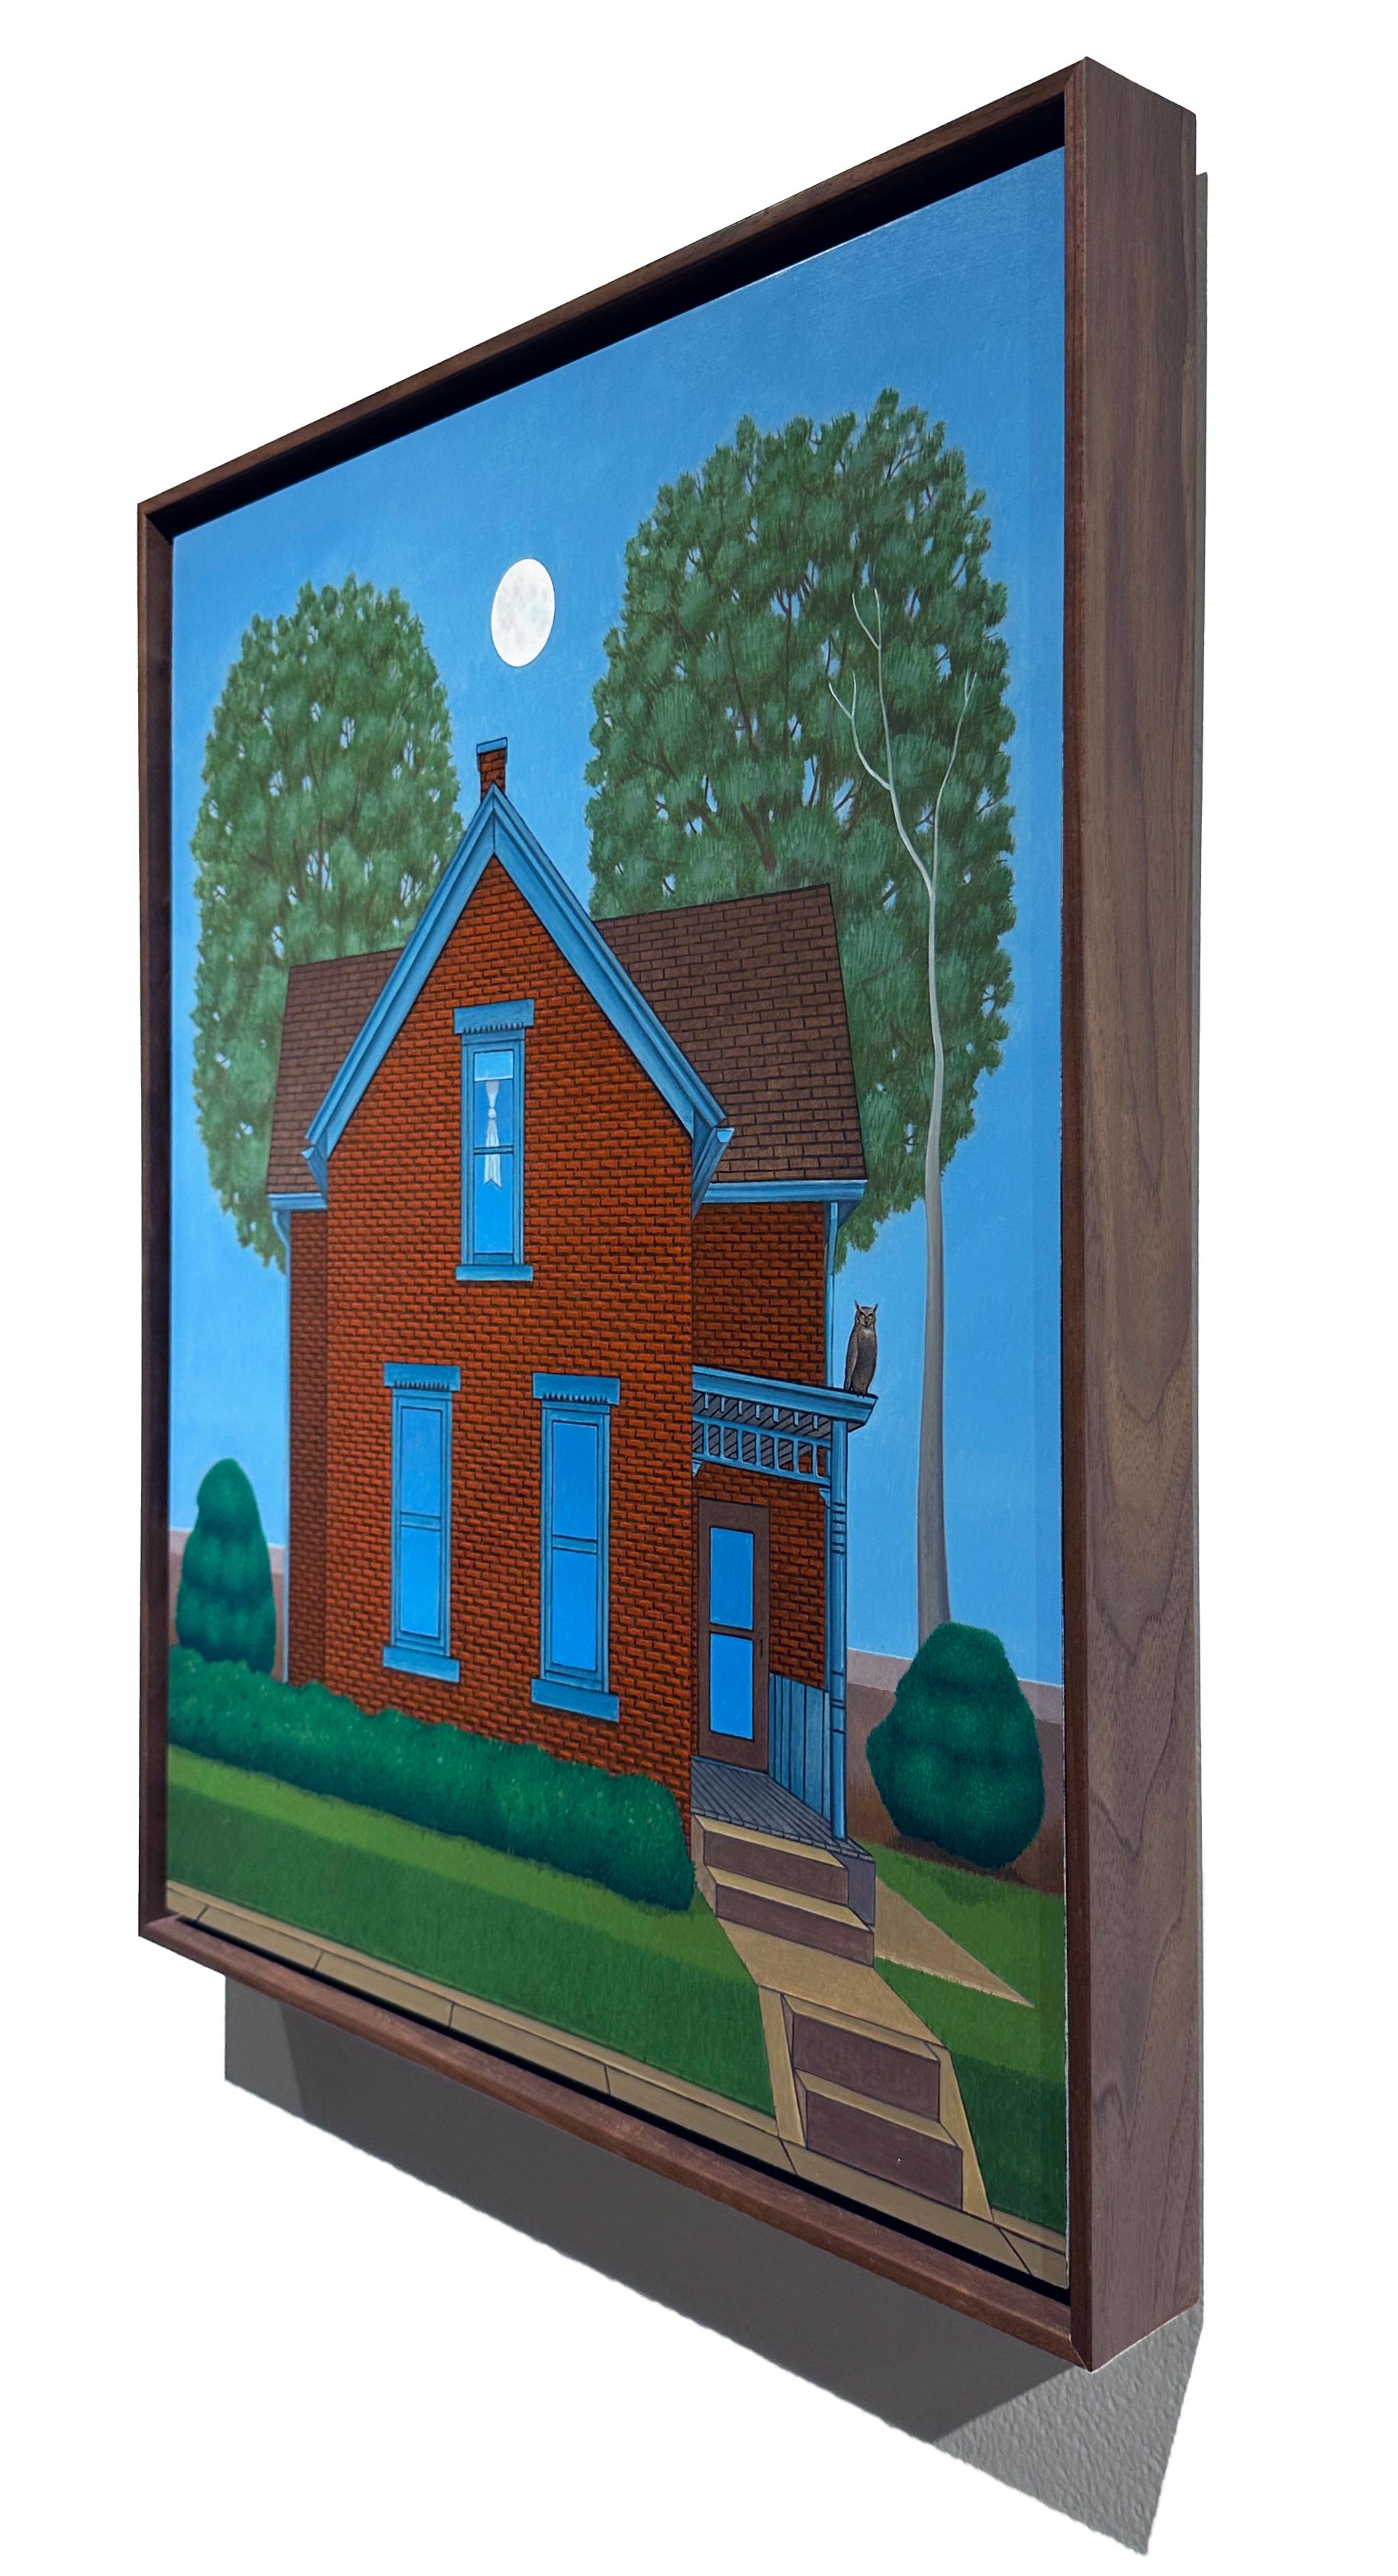 A full moon lingers over the trees to illuminate this quaint cottage, complete with lace curtains and a hoot owl along the eves. The saturated colors bring a warmth to the otherwise stark scene. This piece is floated in a warm walnut wood frame